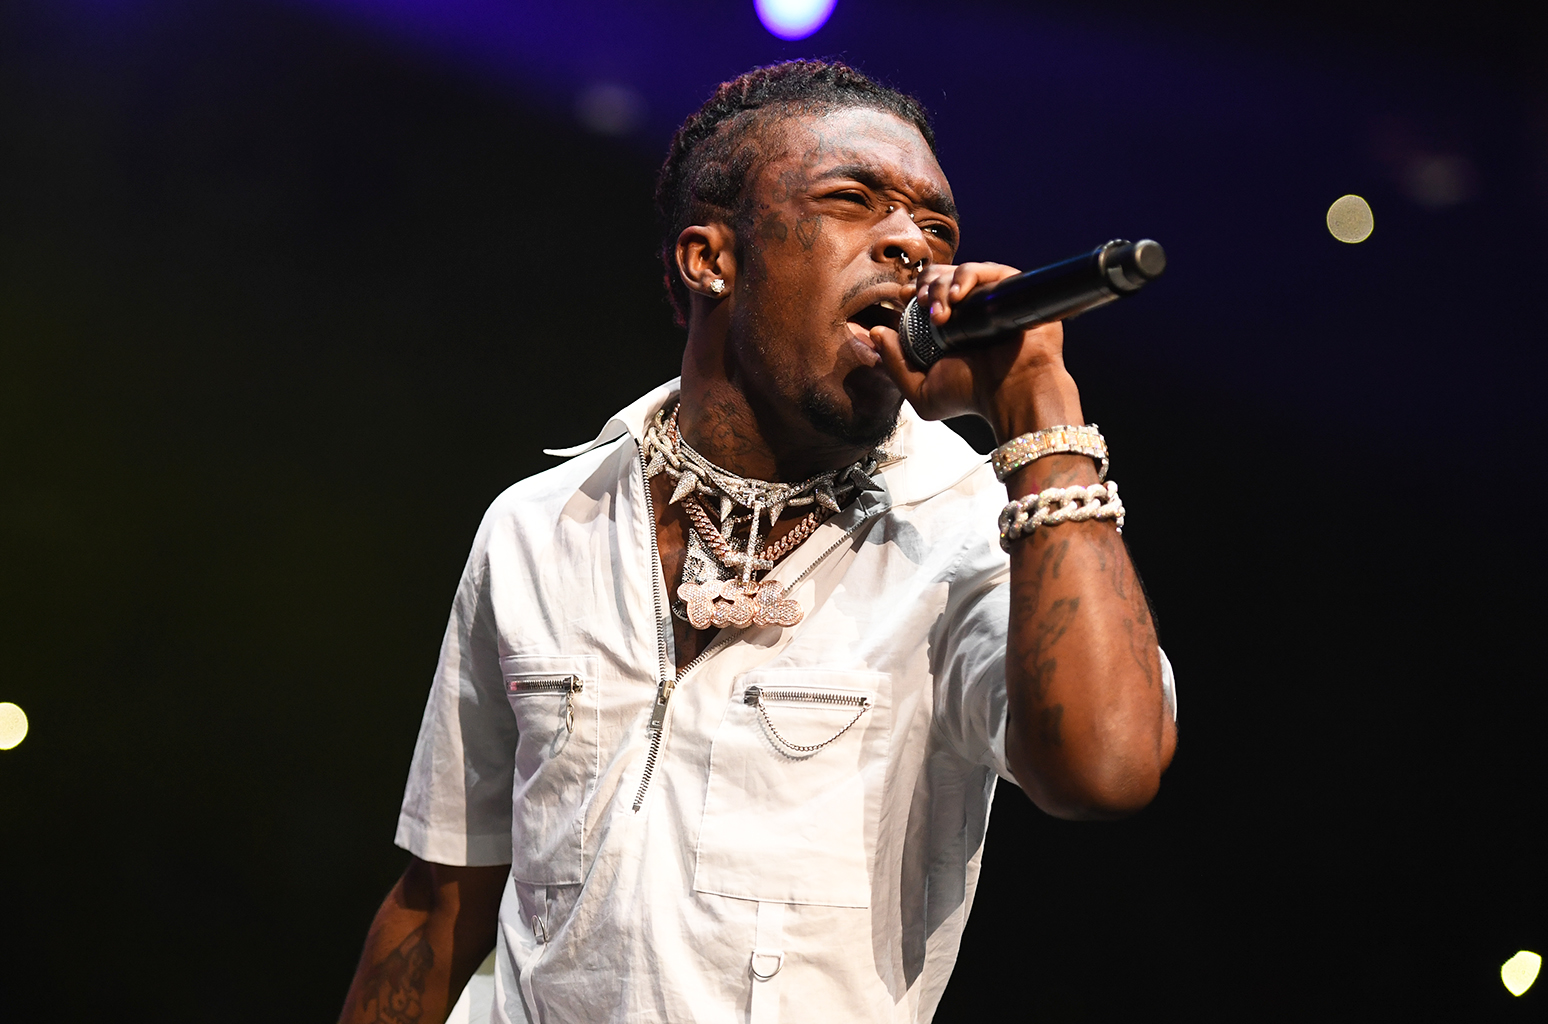 Woman Claims Phone Thrown in Crowd During Lil Uzi Vert Performance Left Her Injured